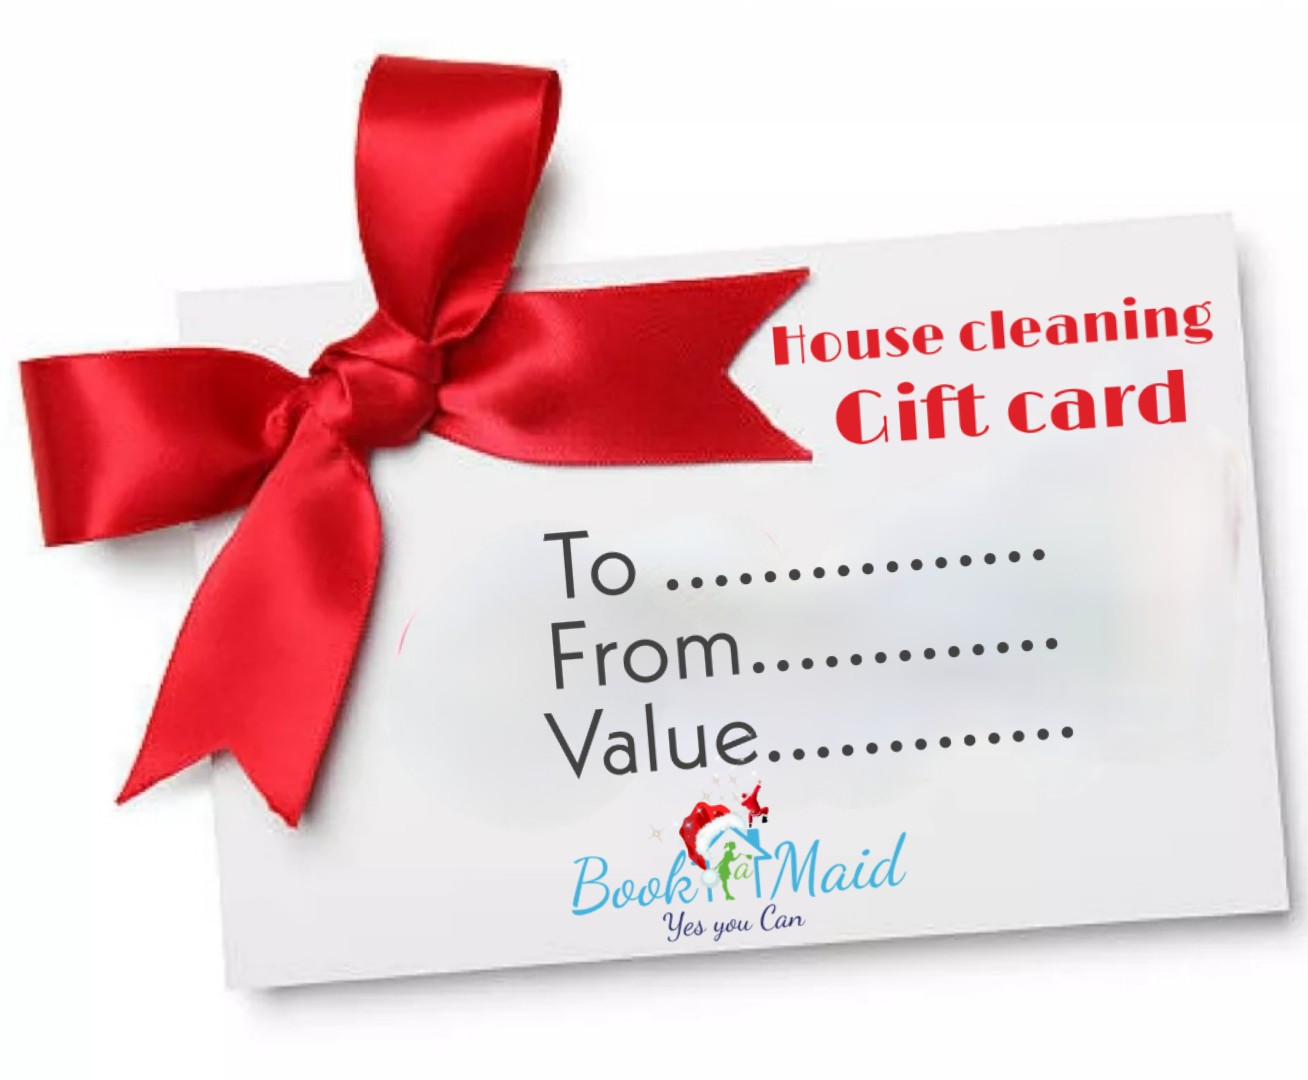 House cleaning gift card packages